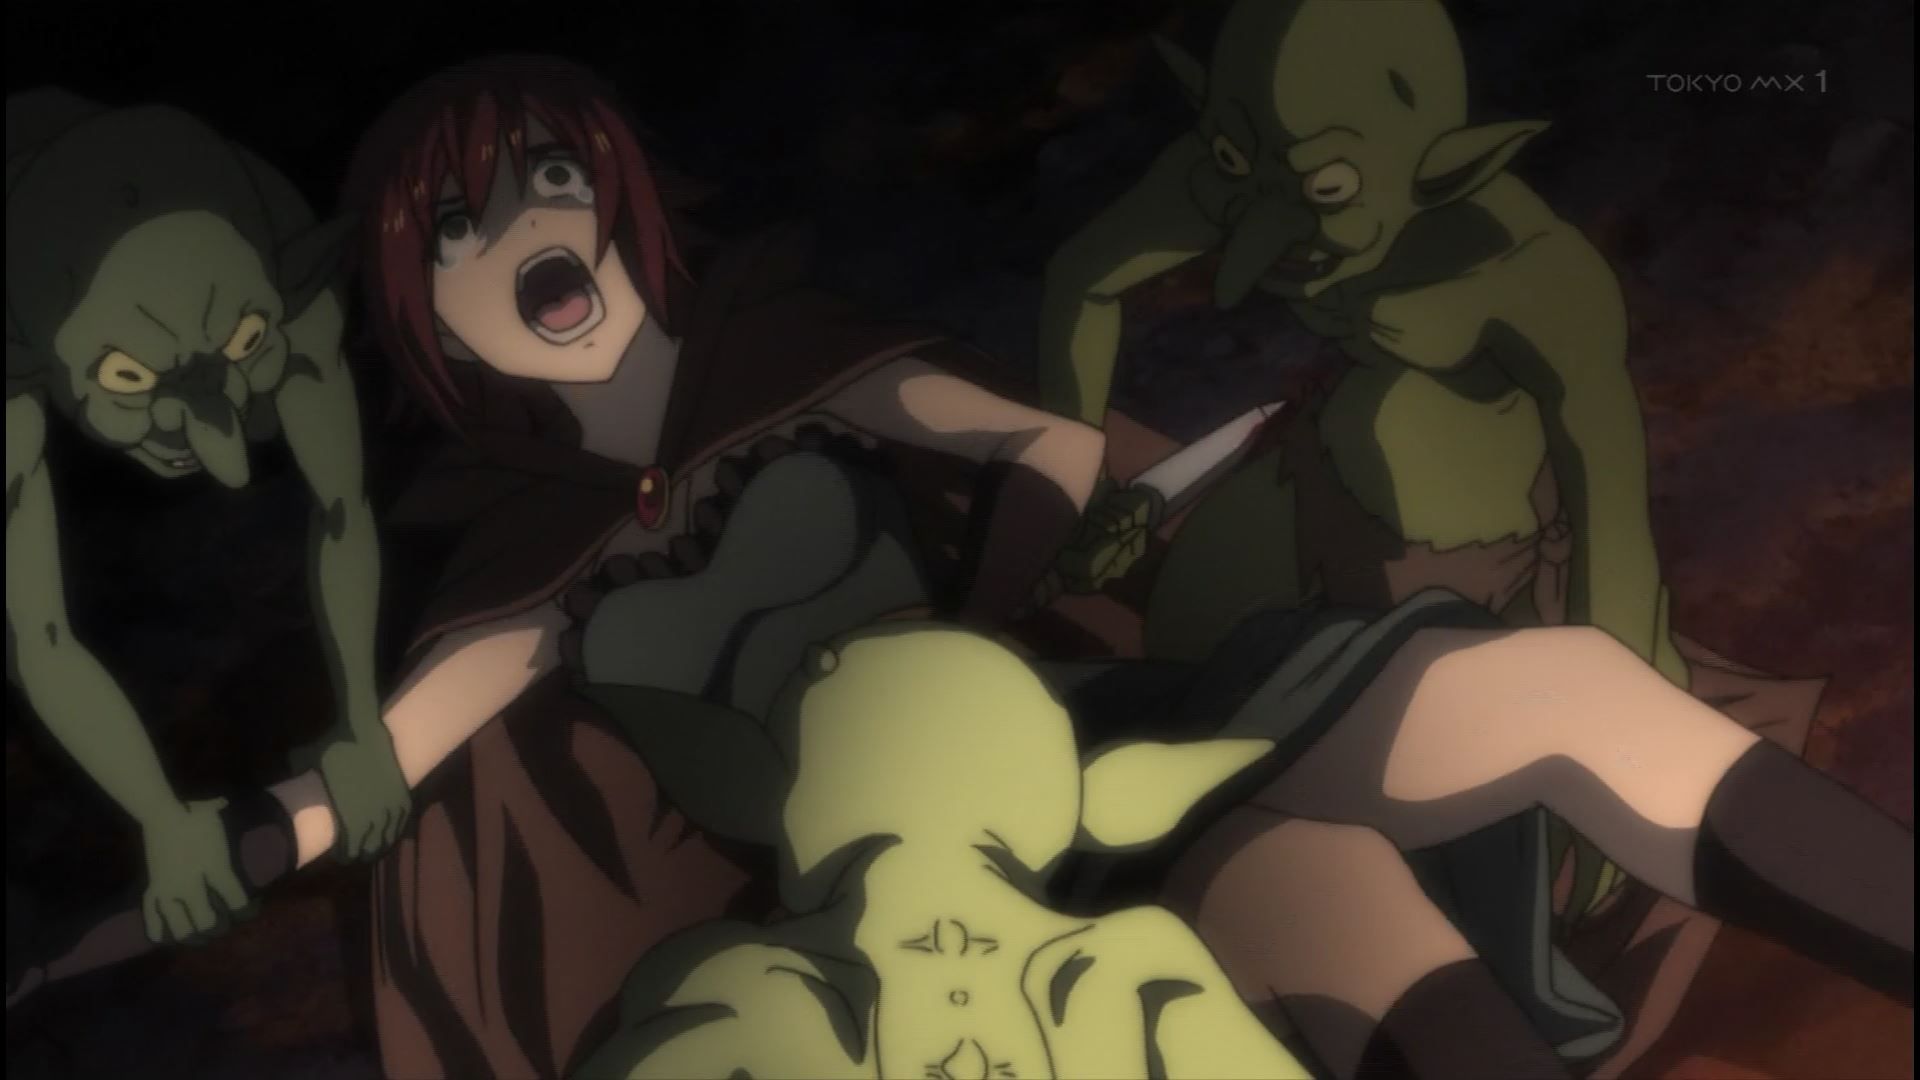 The scene and incontinence scene that the girl is raped by Goblin in one story anime [Goblin Slayer]! 2